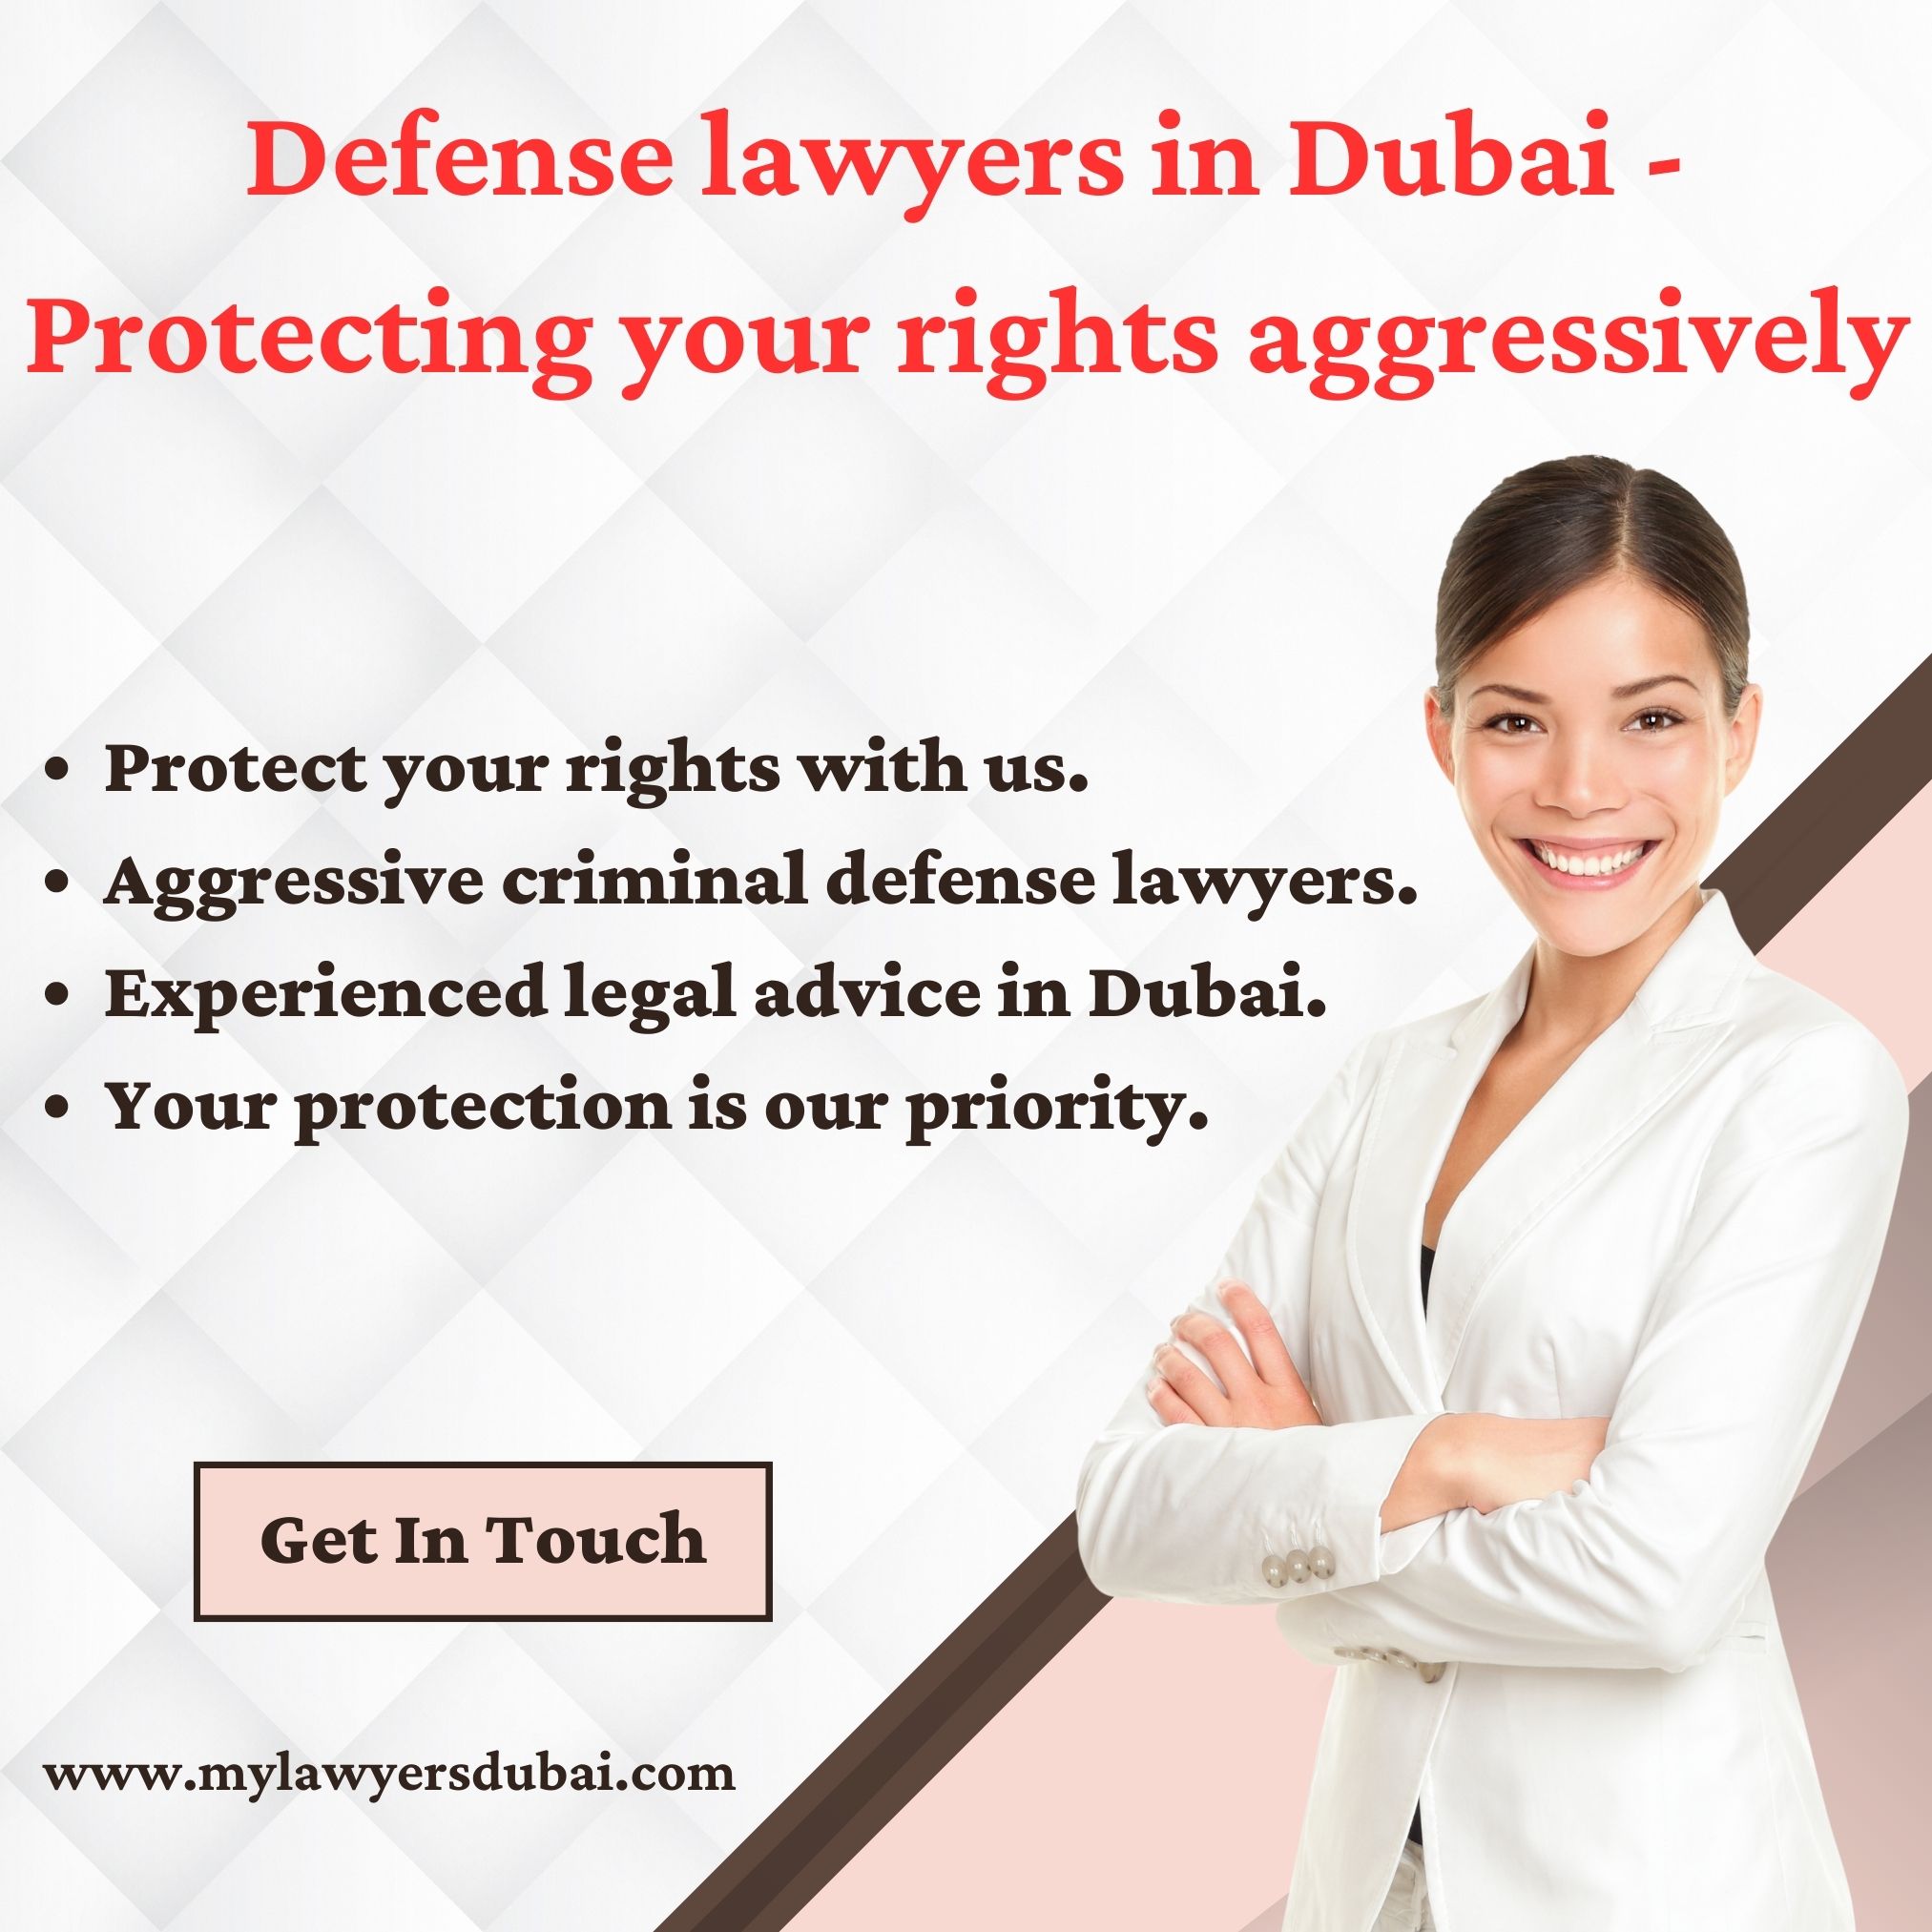 Aggressive Criminal Defense Lawyers for Your Protection